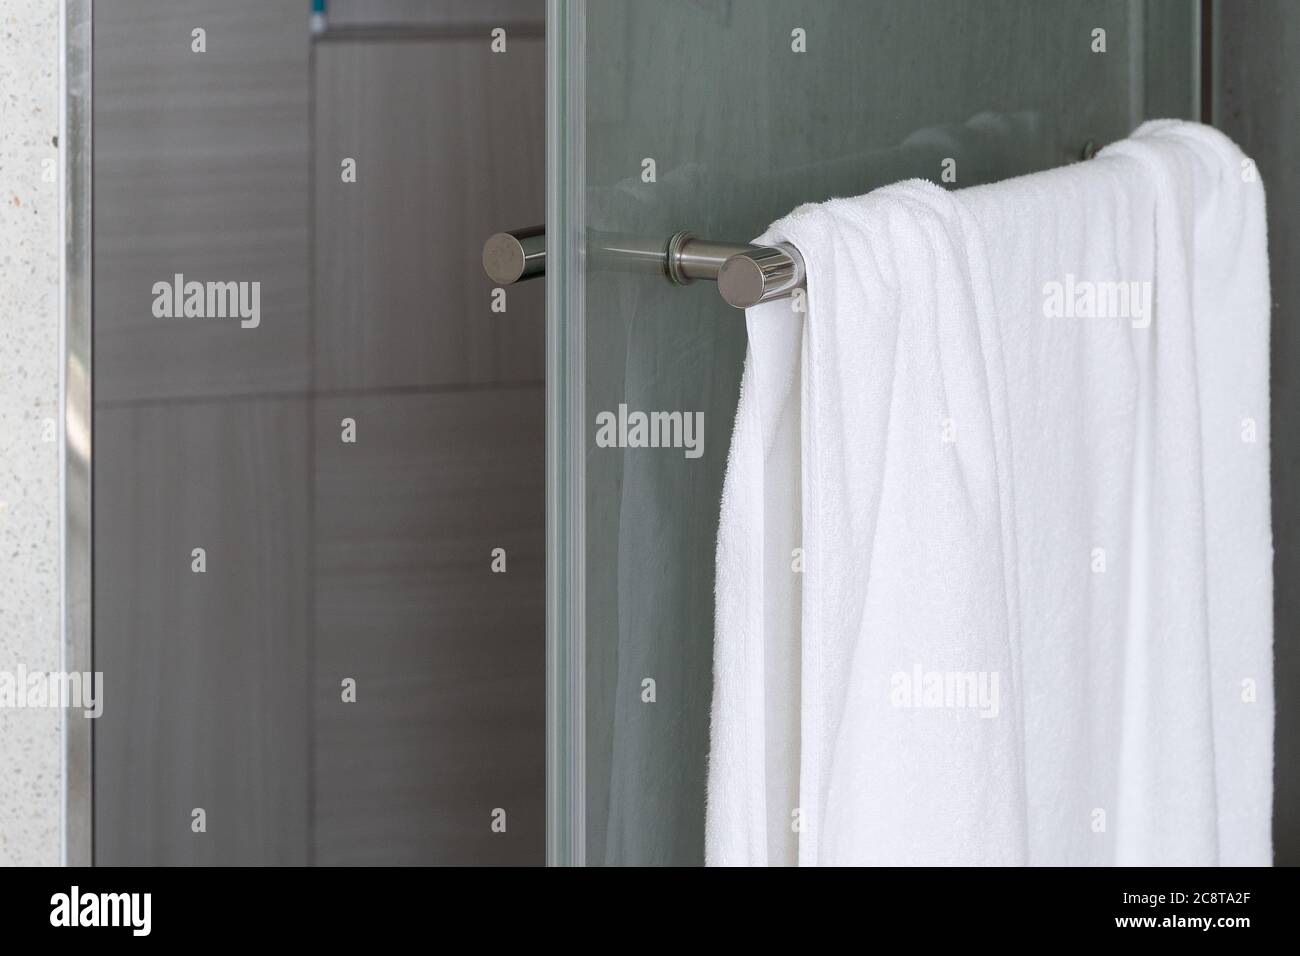 Close up. White and clean towel is hanging on the exposed concrete wall in the bathroom. Stock Photo